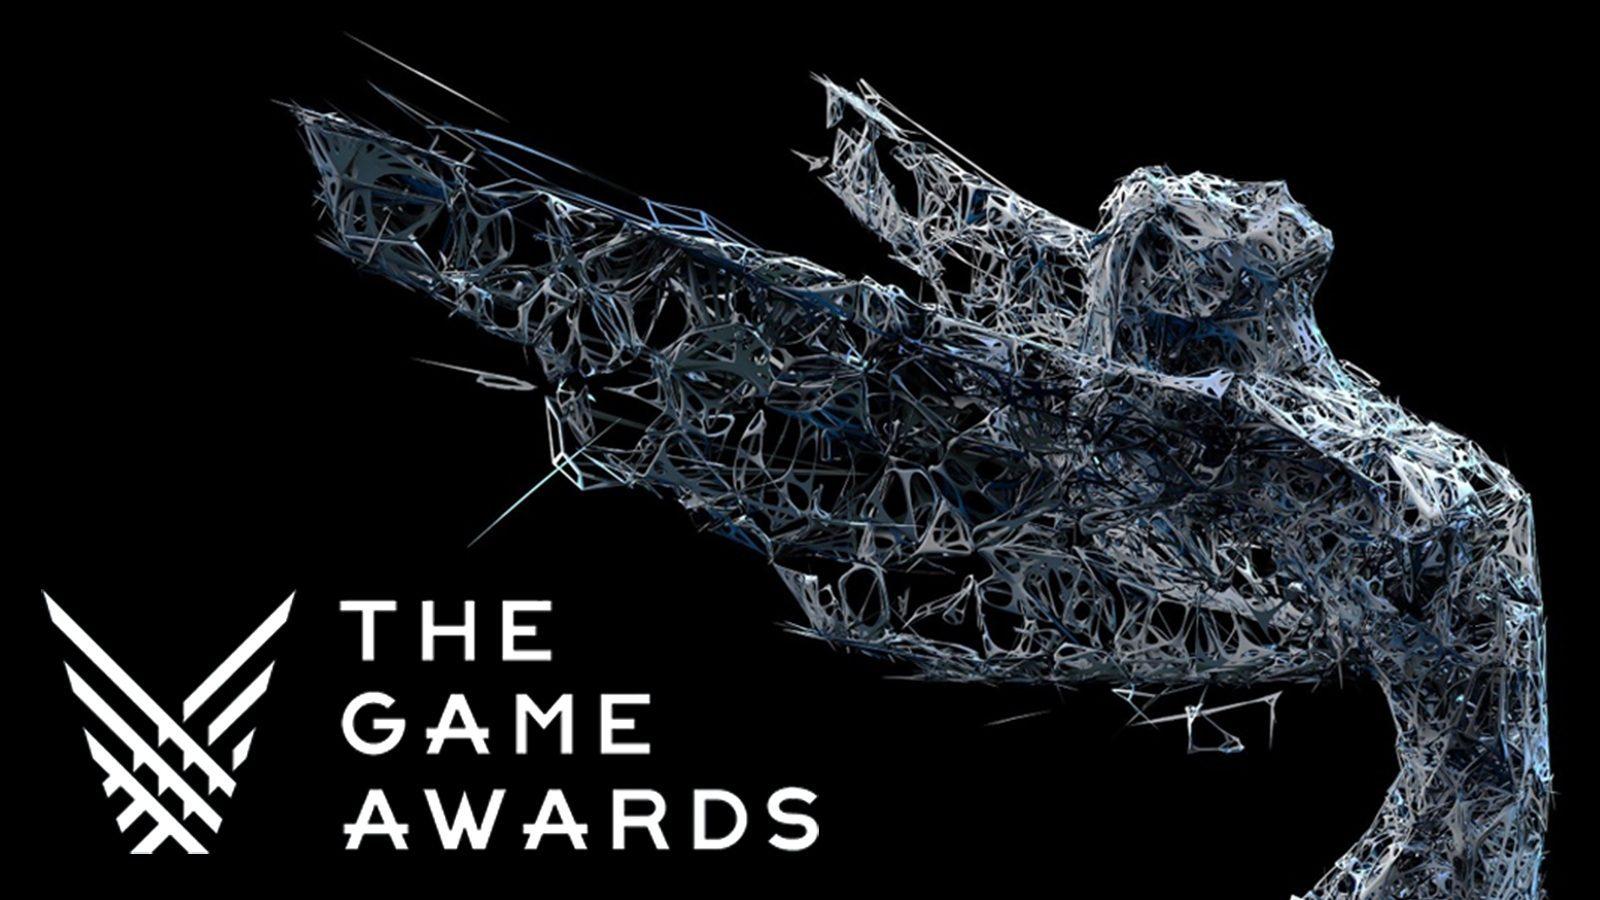 The Game Awards 2019 will have around 10 new game